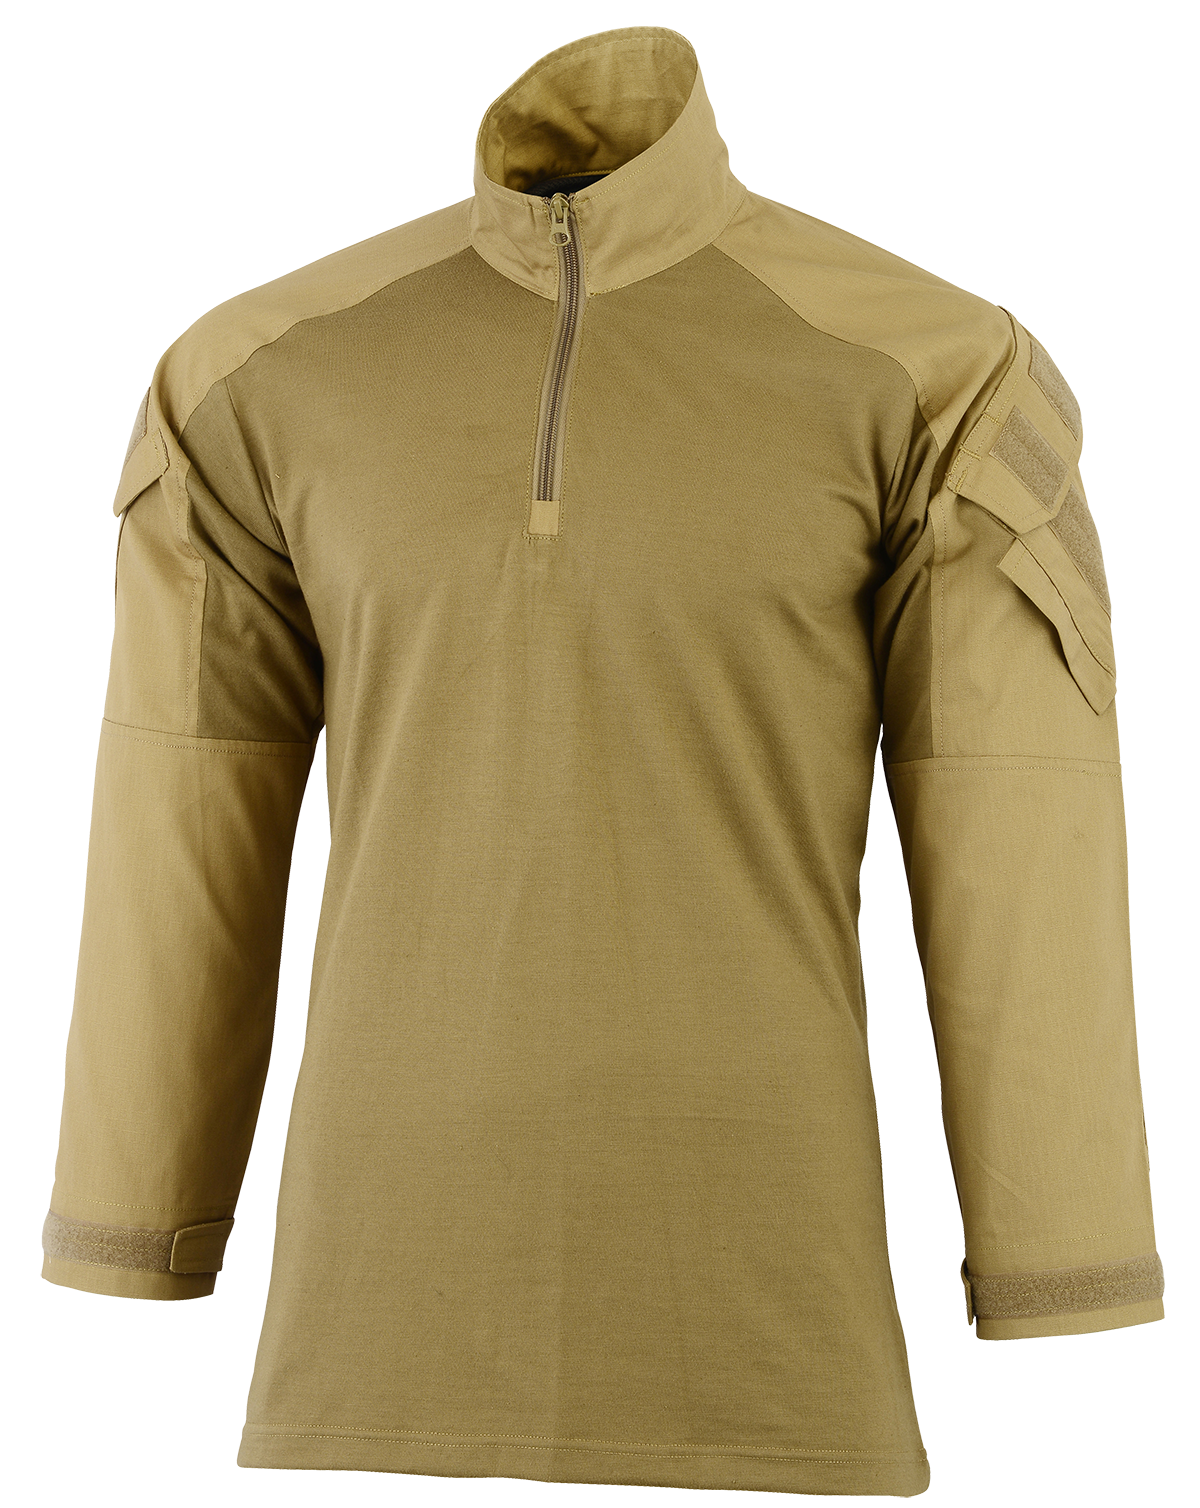 Tactical zone HYBRID TACTICAL SHIRT IS A PERFECT COMBAT SHIRT Colour Coyote front